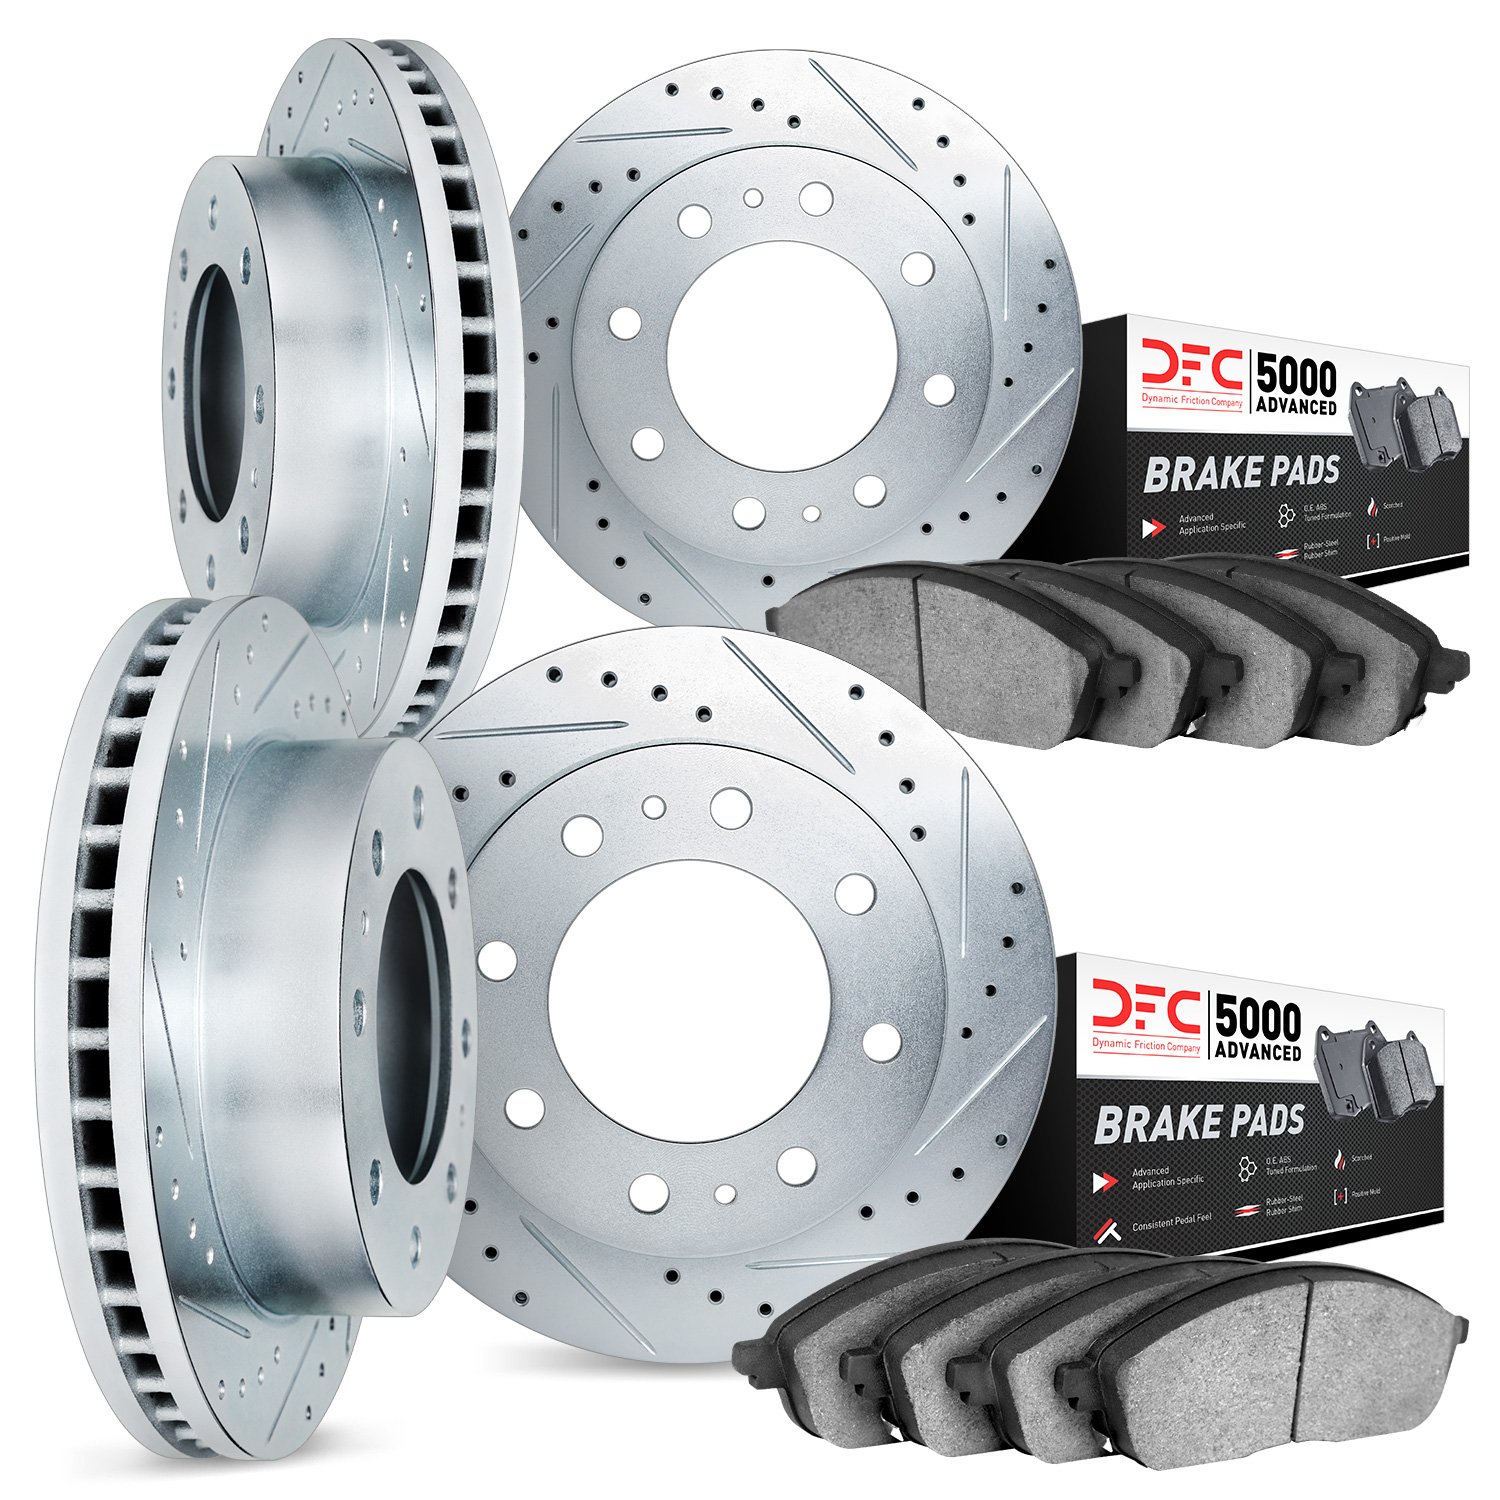 7504-54313 Drilled/Slotted Brake Rotors w/5000 Advanced Brake Pads Kit [Silver], 1999-2007 Ford/Lincoln/Mercury/Mazda, Position: